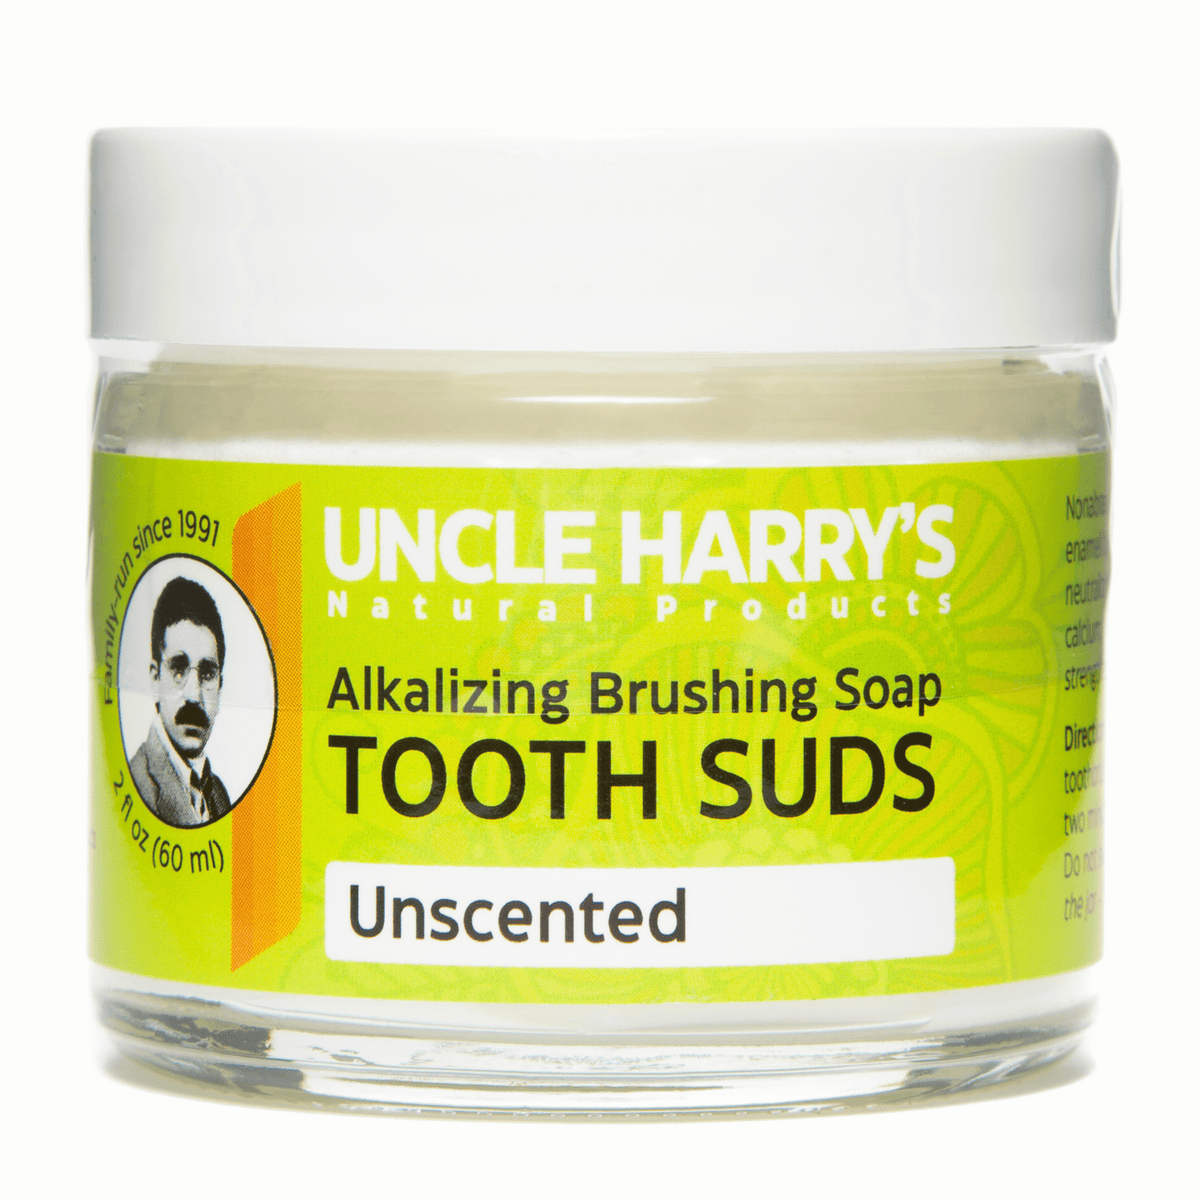 Primary Image of Unscented Brushing Soap Tooth Suds